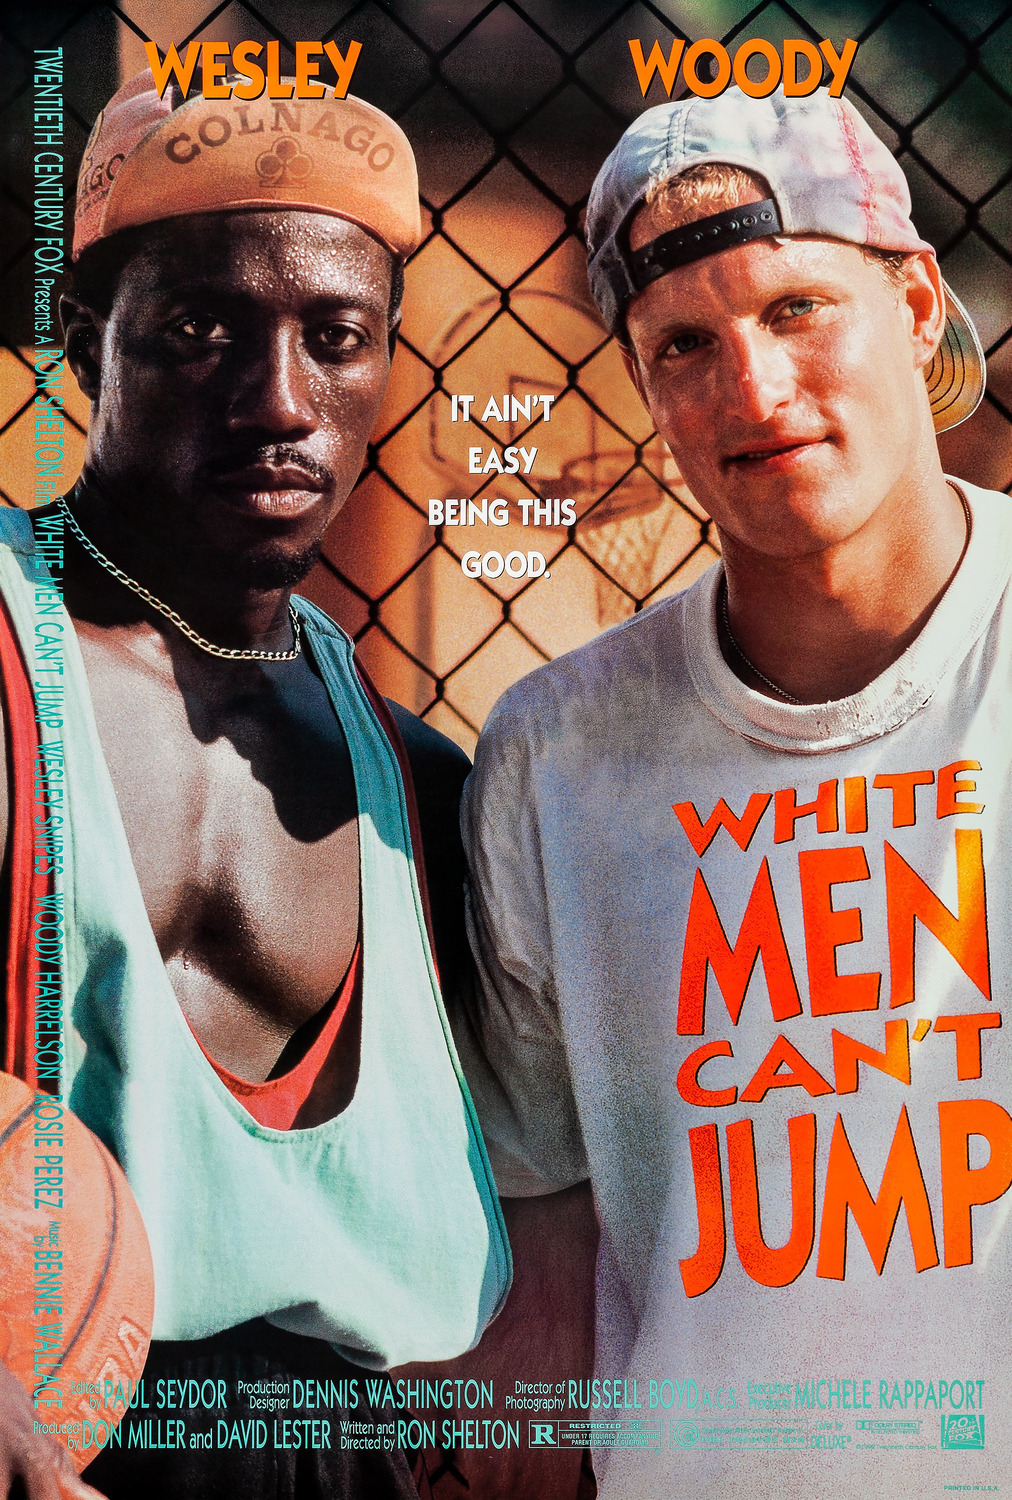 White Men Can't Jump (1 of 2) Extra Large Movie Poster Image IMP Awards